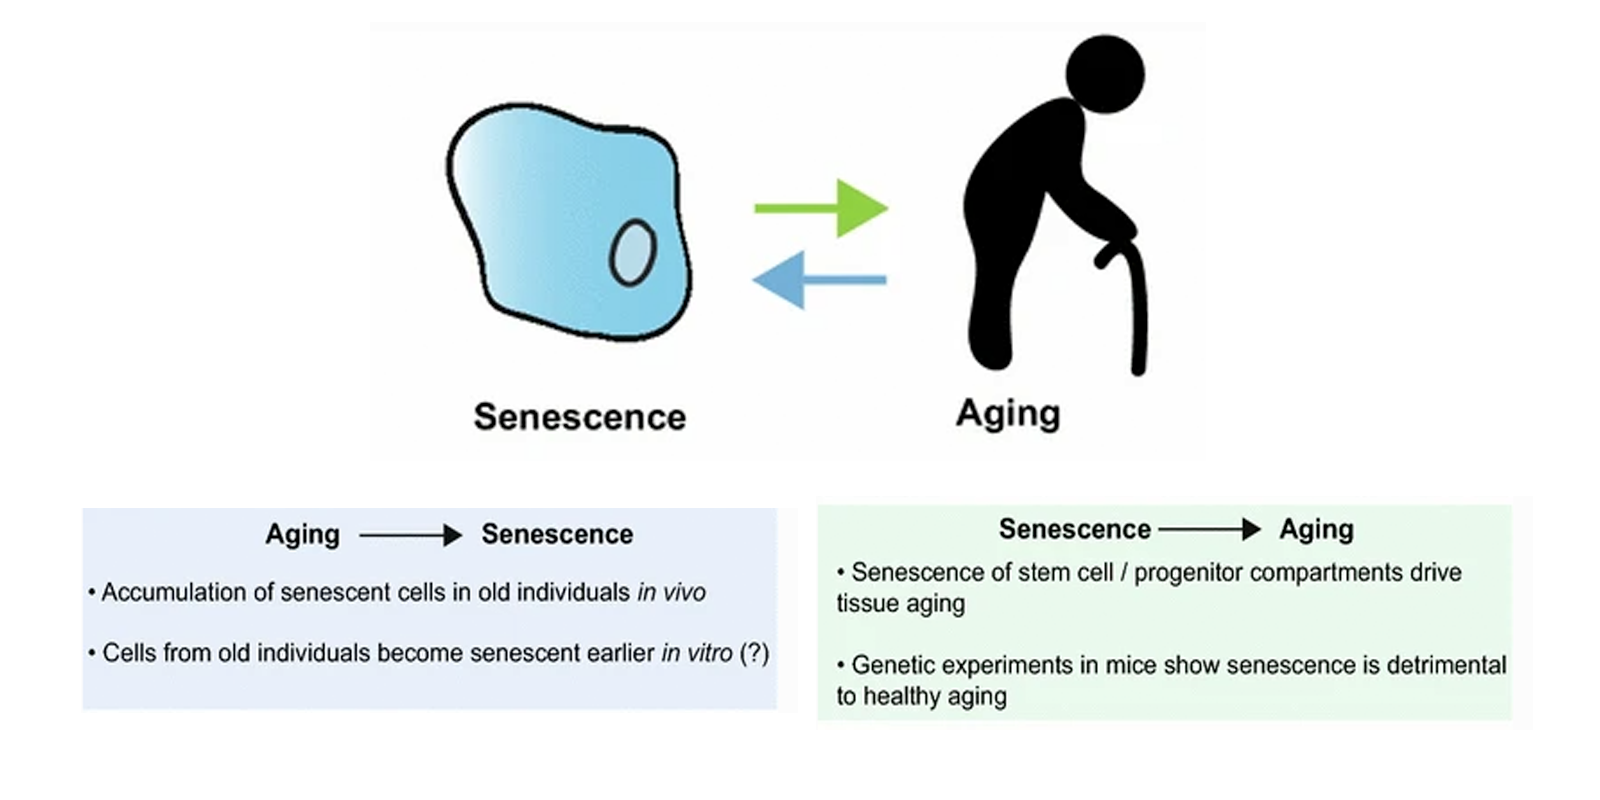 Cell Process How is cellular senescence related to aging?